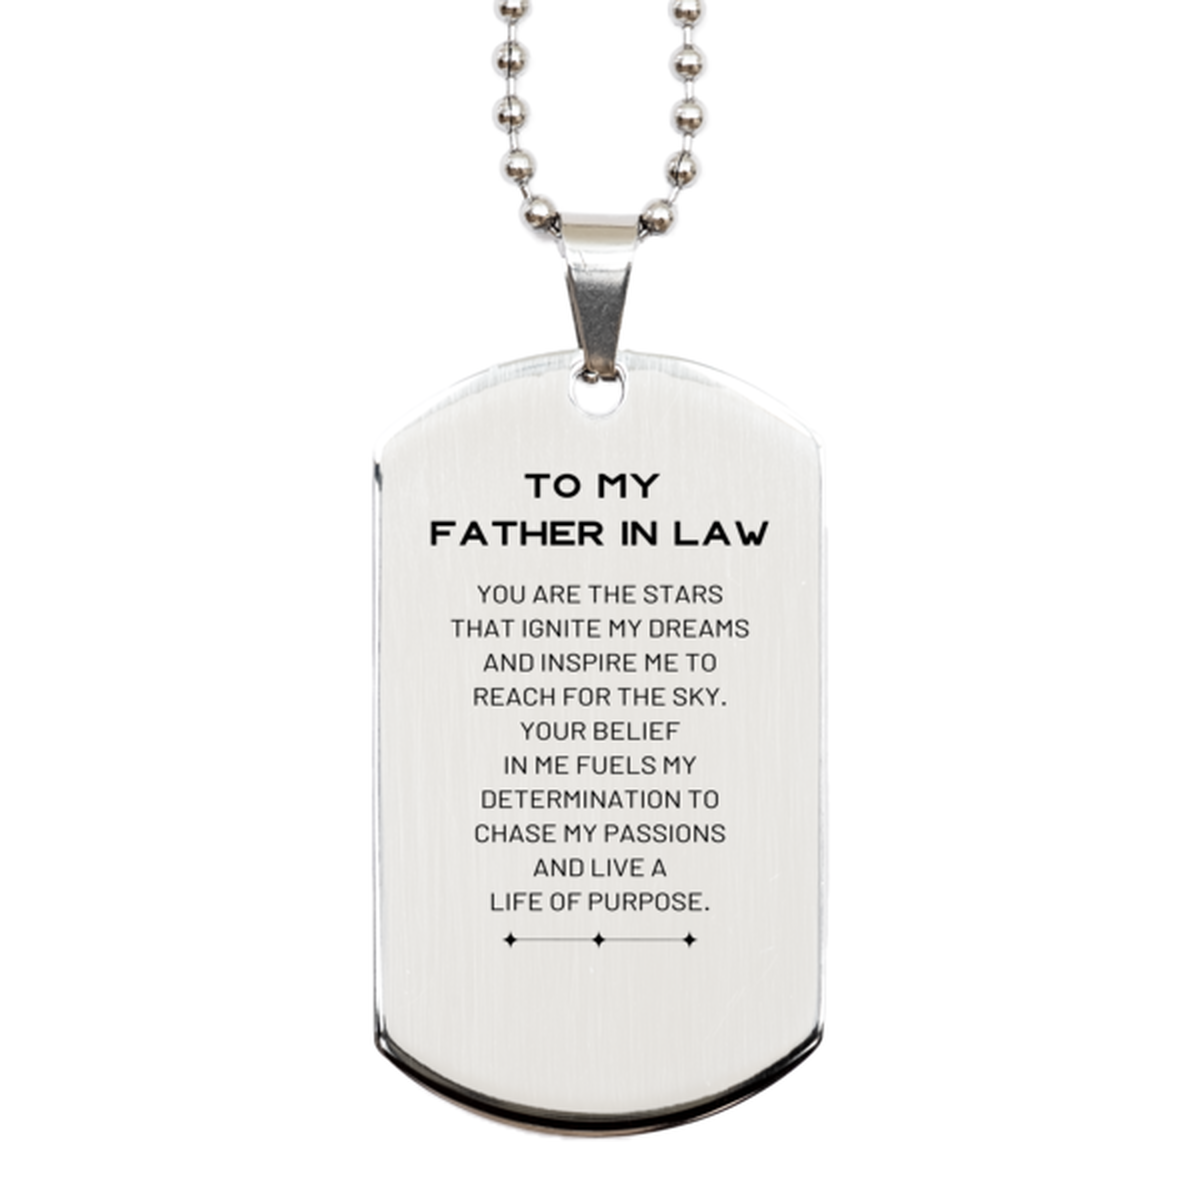 To My Father In Law Silver Dog Tag, You are the stars that ignite my dreams and inspire me to reach for the sky, Birthday Unique Gifts For Father In Law, Thank You Gifts For Father In Law